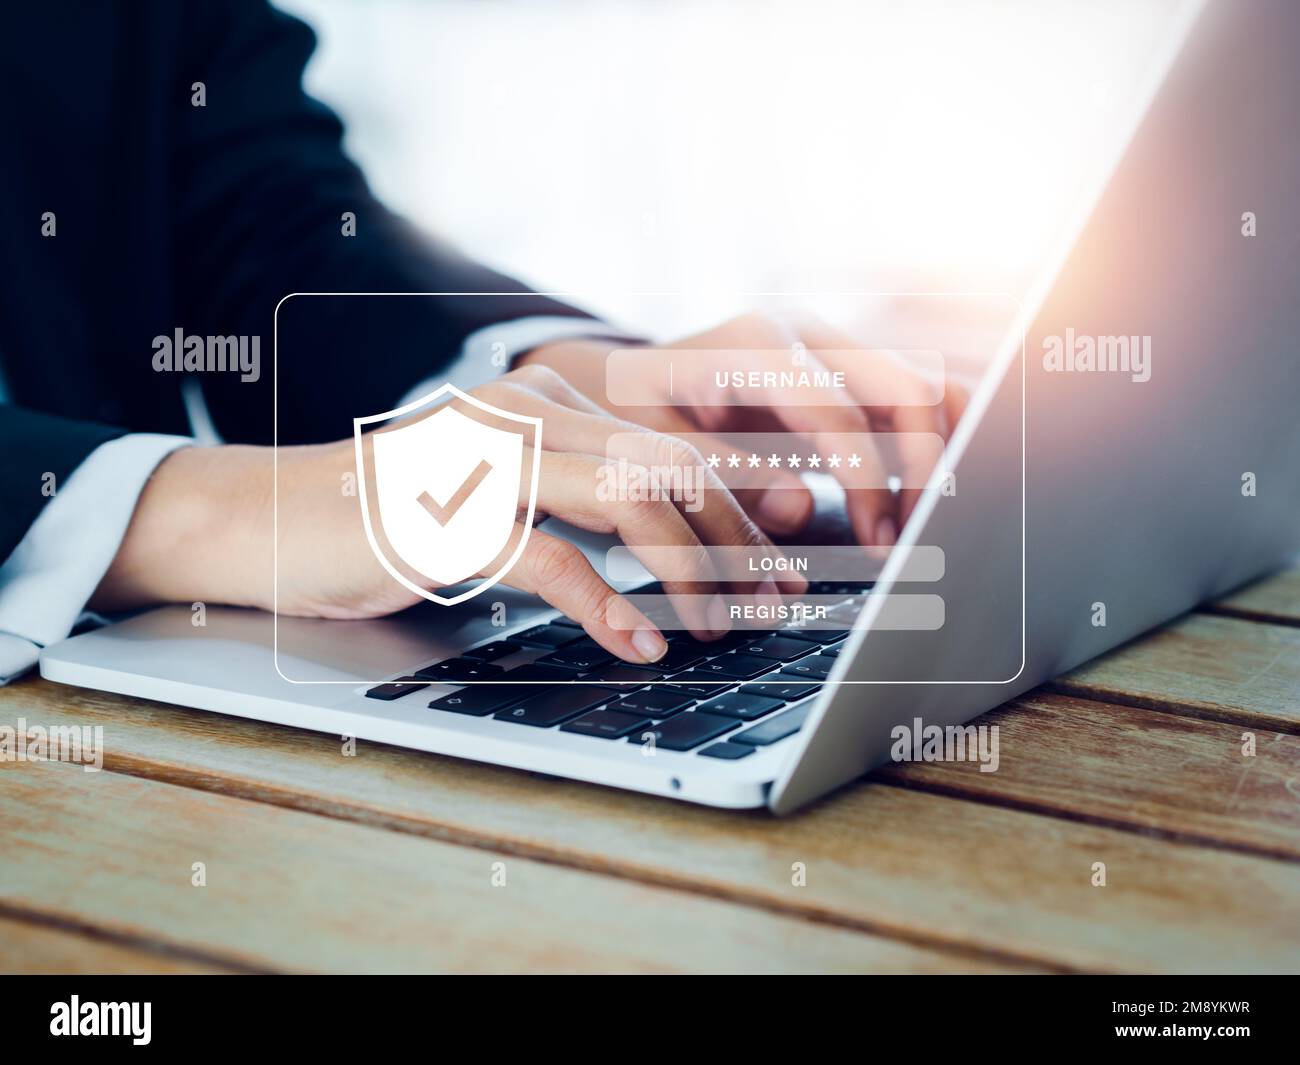 Cybersecurity system technology, login and password, confidential data security and secured internet access concepts. Shield icon and login page appea Stock Photo